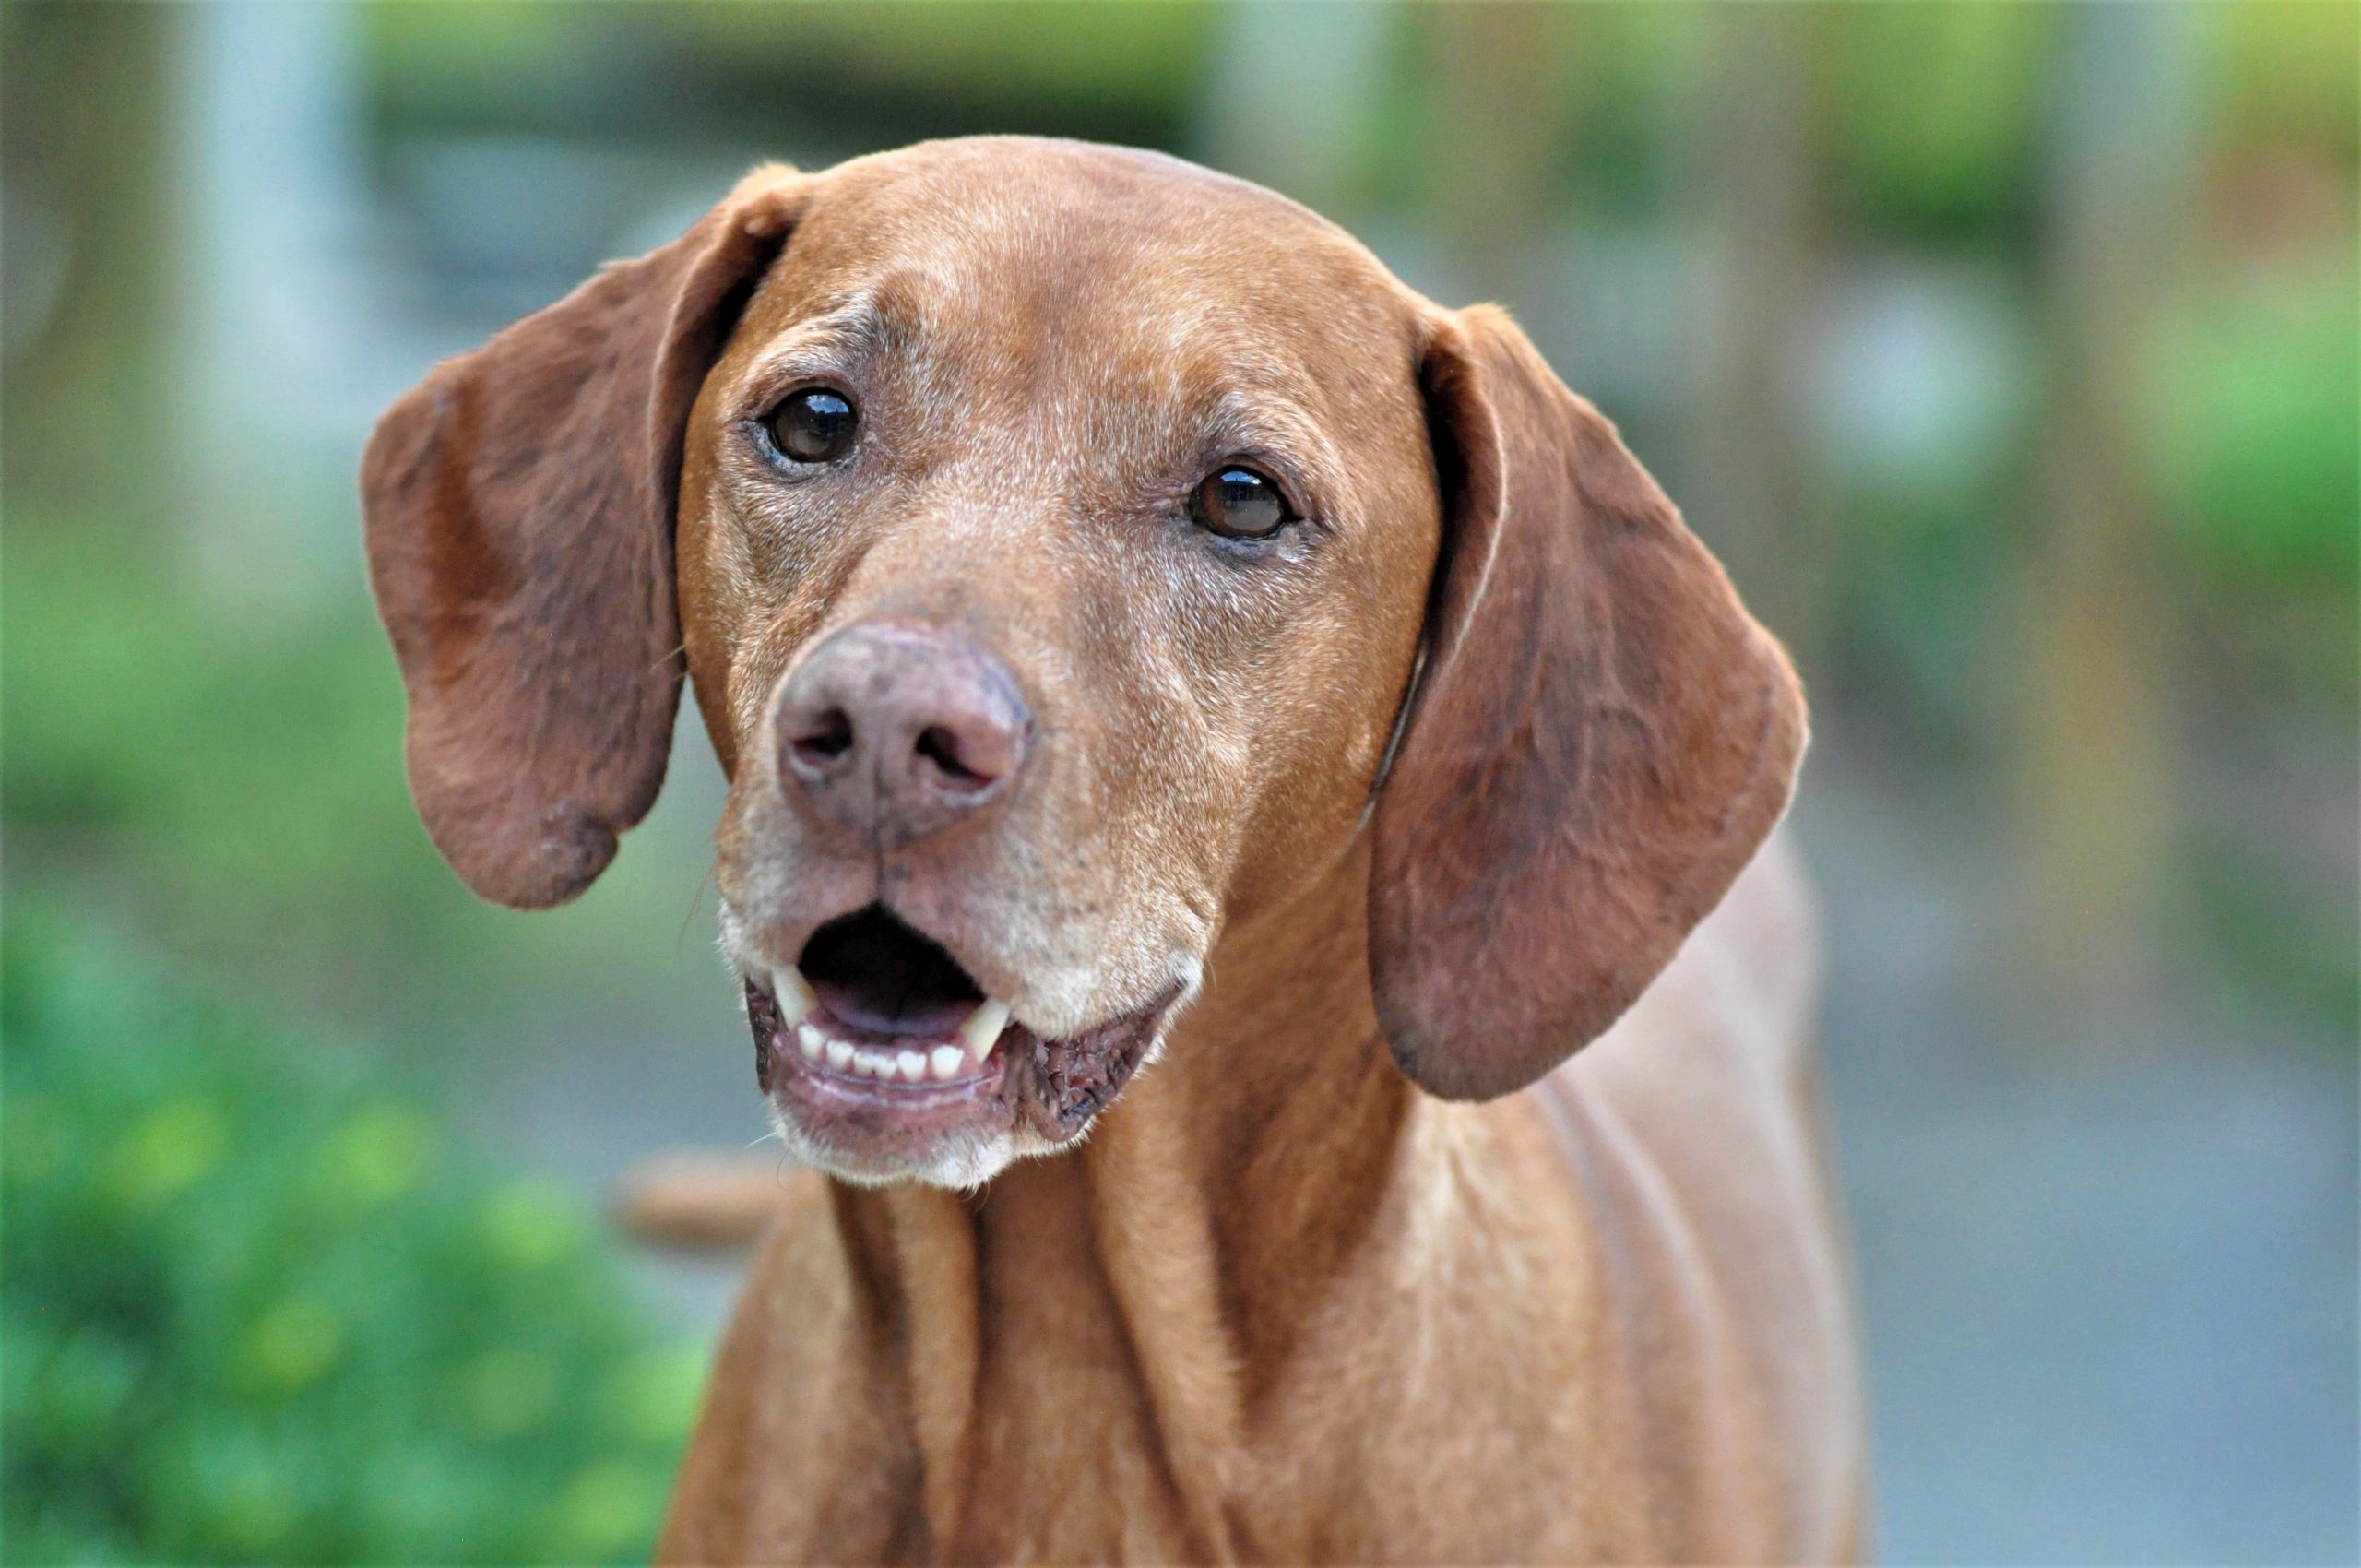 What’s The Bite Force of a Vizsla & Does It Hurt?